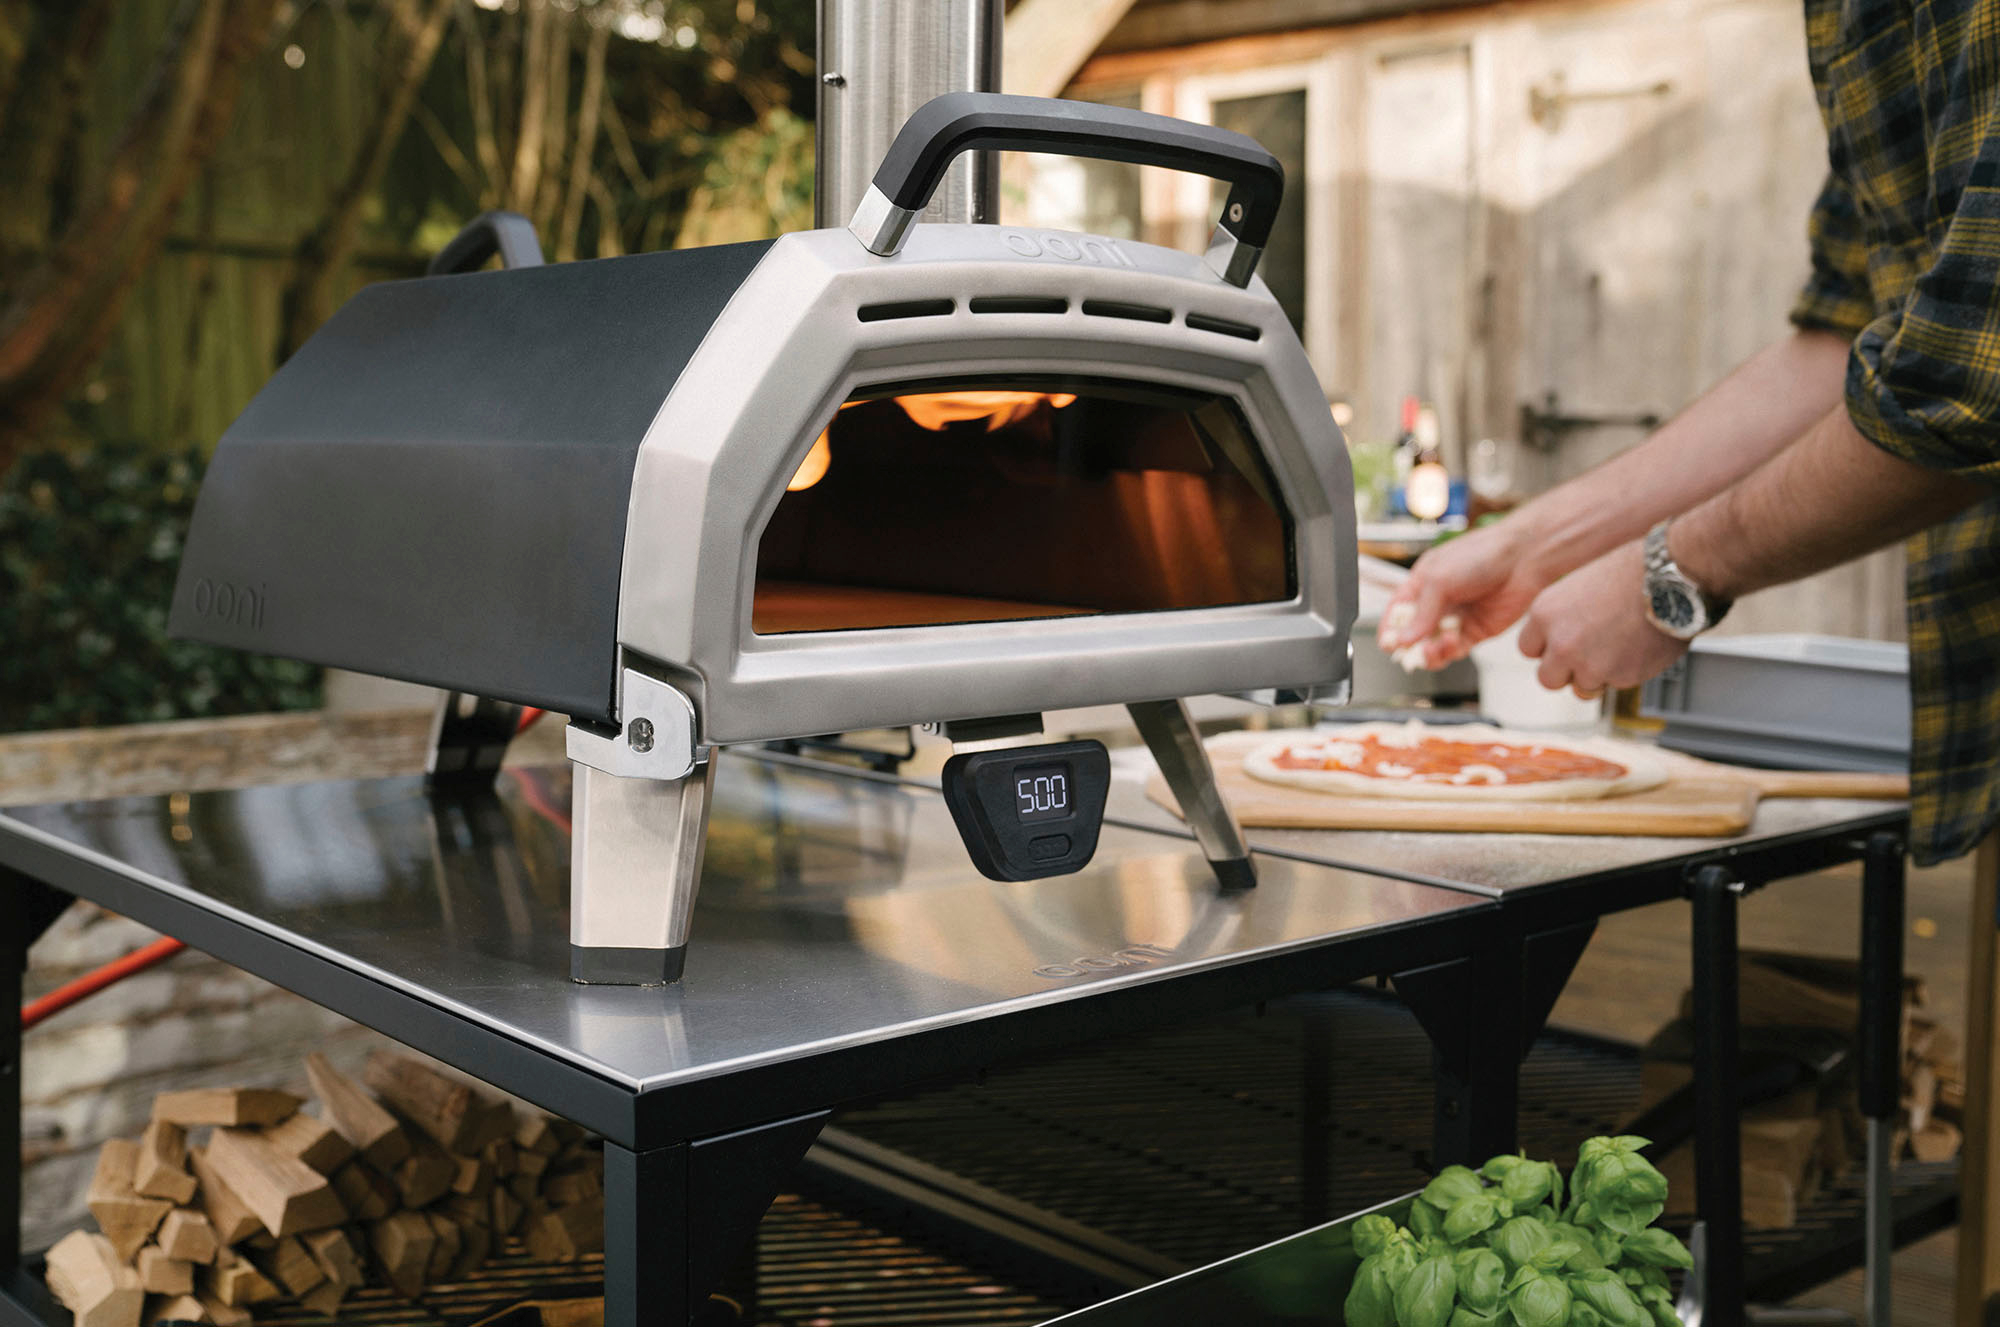 Ooni Pizza Oven Review  Is The Karu 16 The Best Choice?